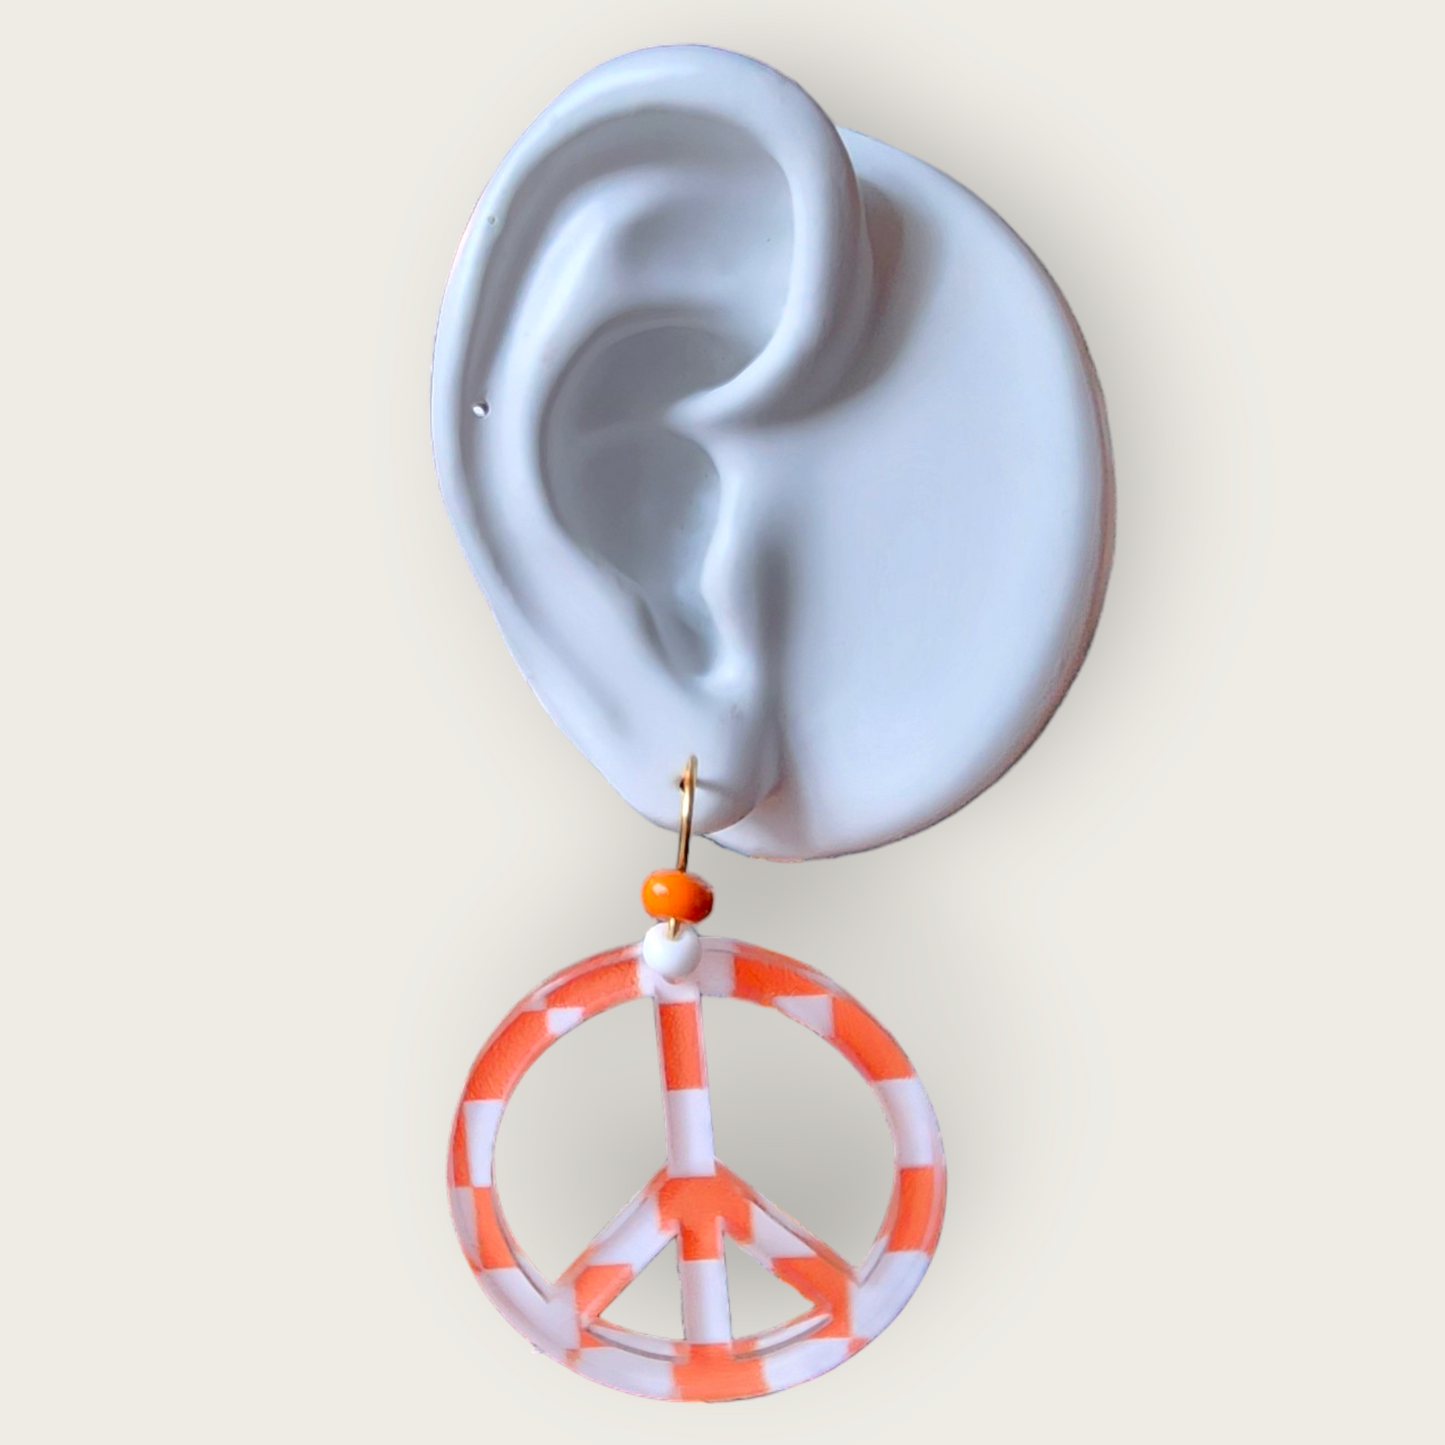 Checkered Peace Sign Earrings